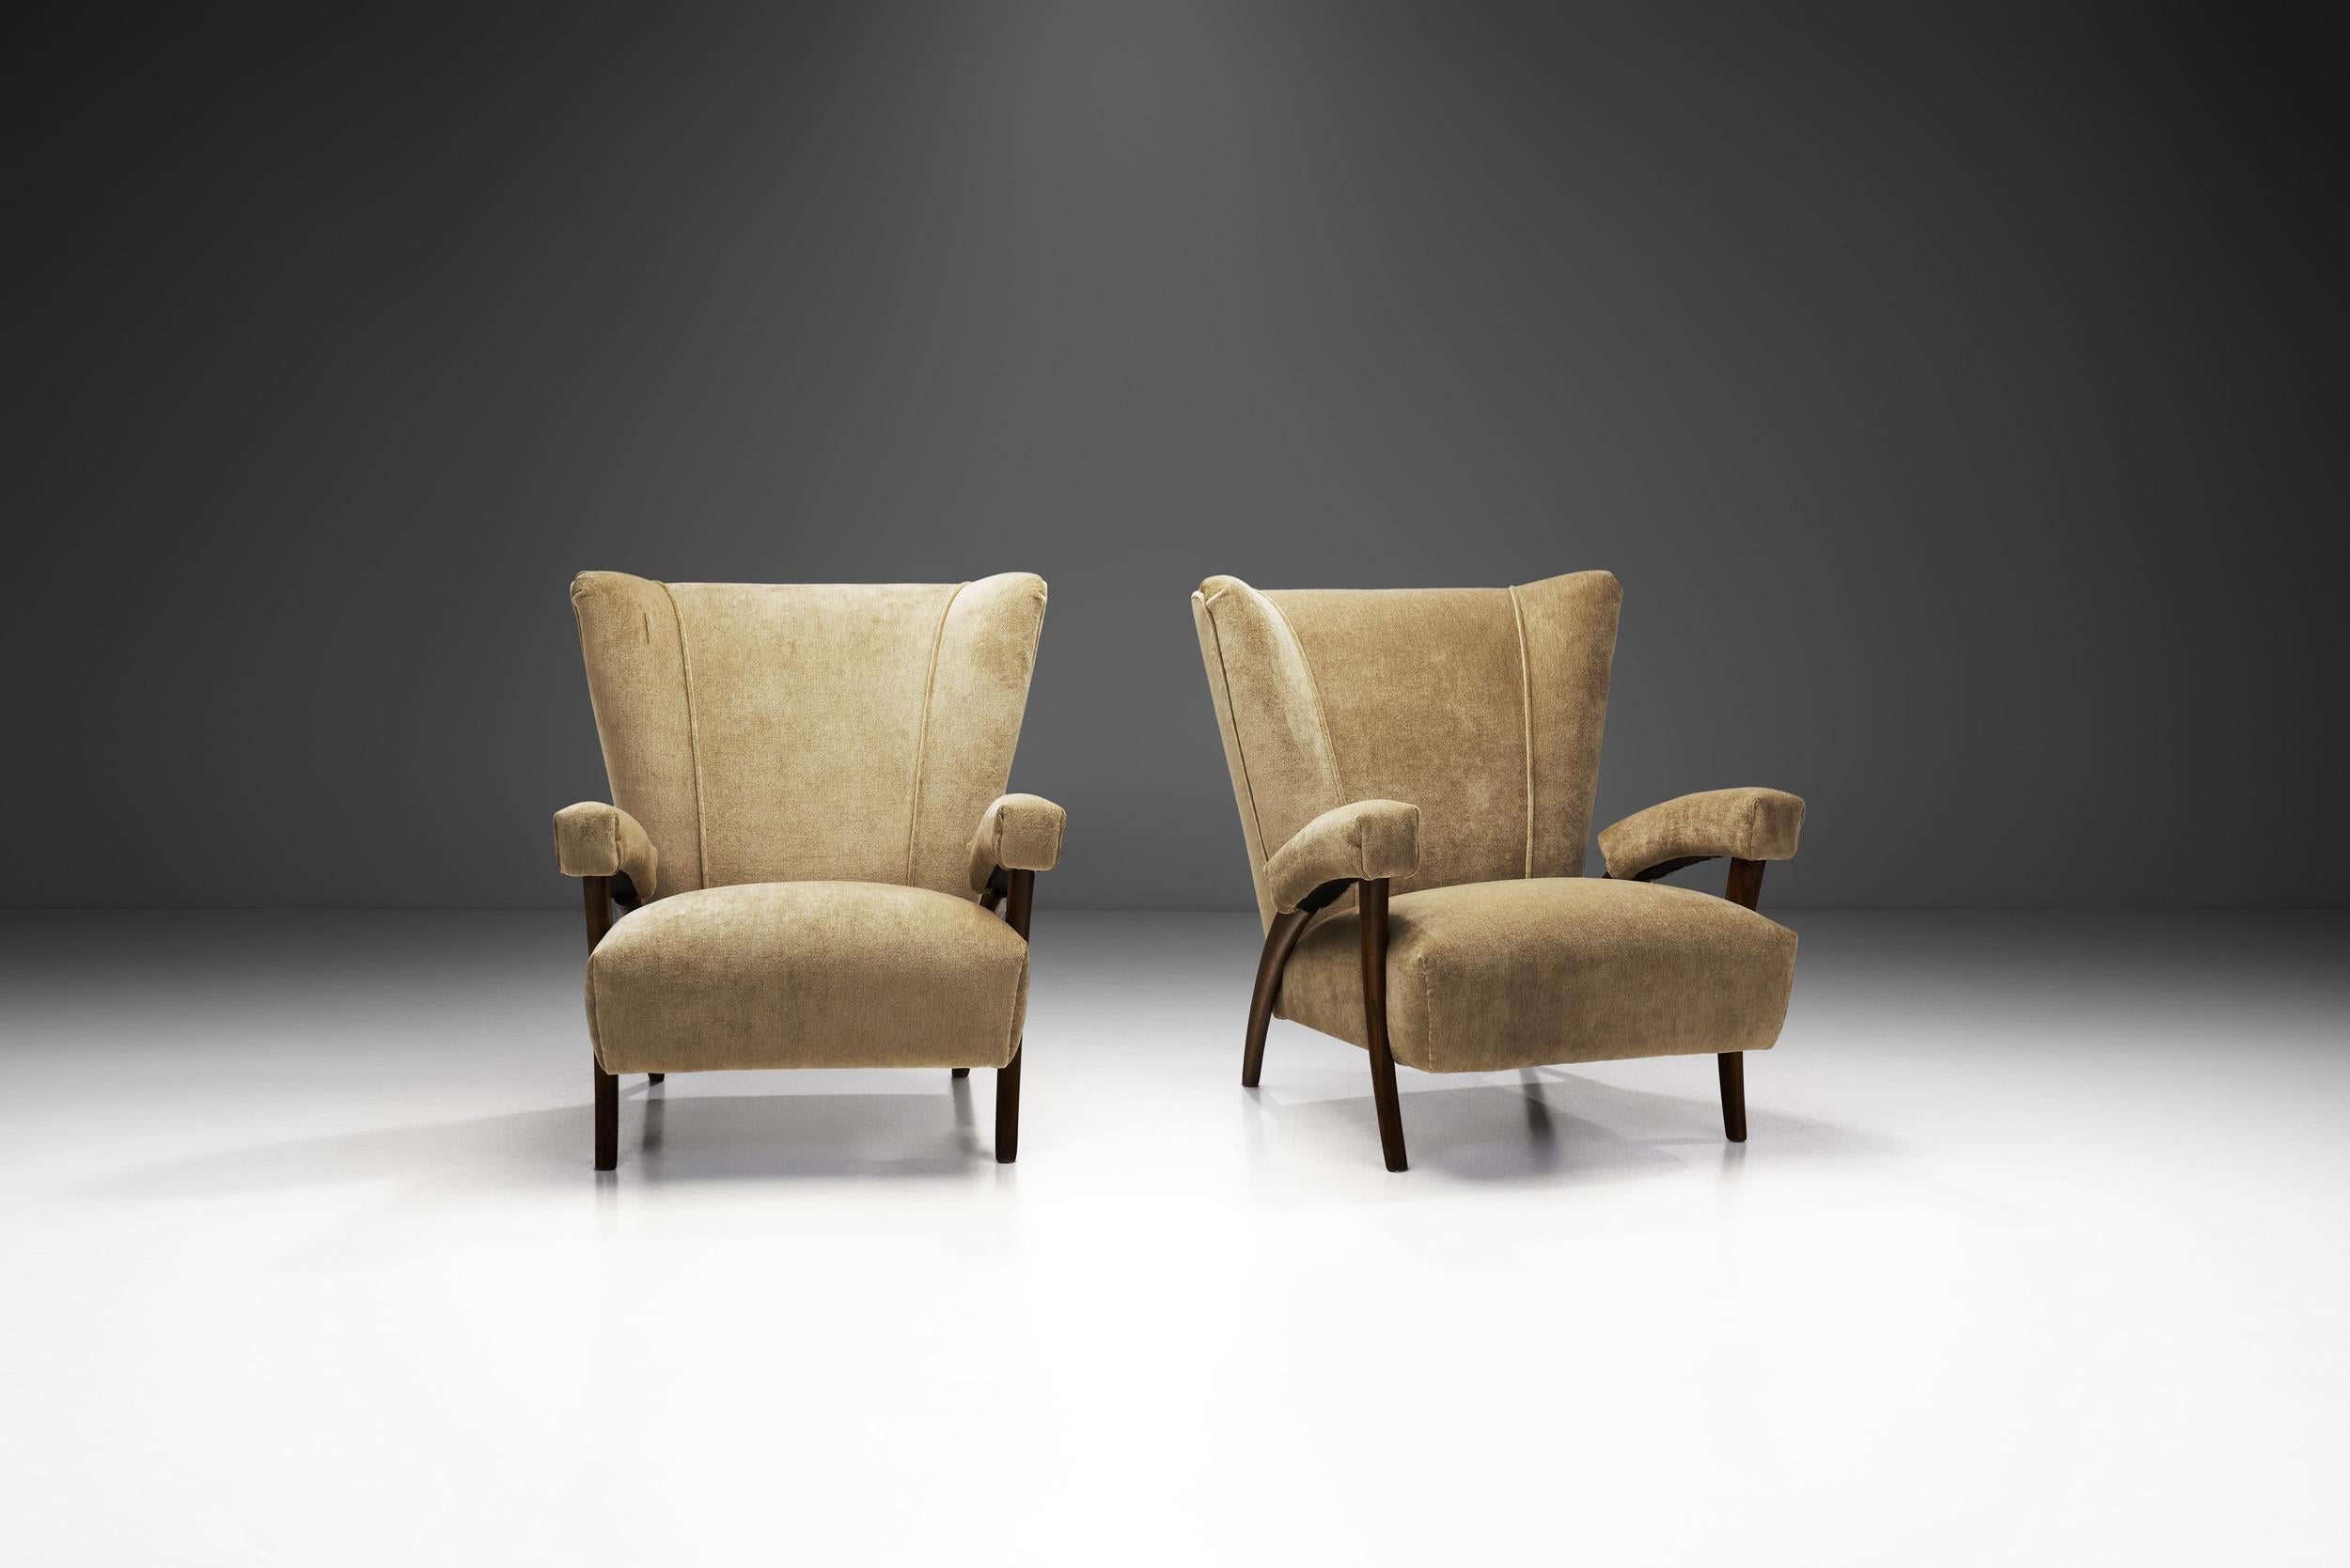 Italian Modern furniture is defined by unique design, perfect execution, and exclusivity. This pair of architectural armchairs is generally attributed to Italian design icon, Paolo Buffa. His design language was always coherent with current times